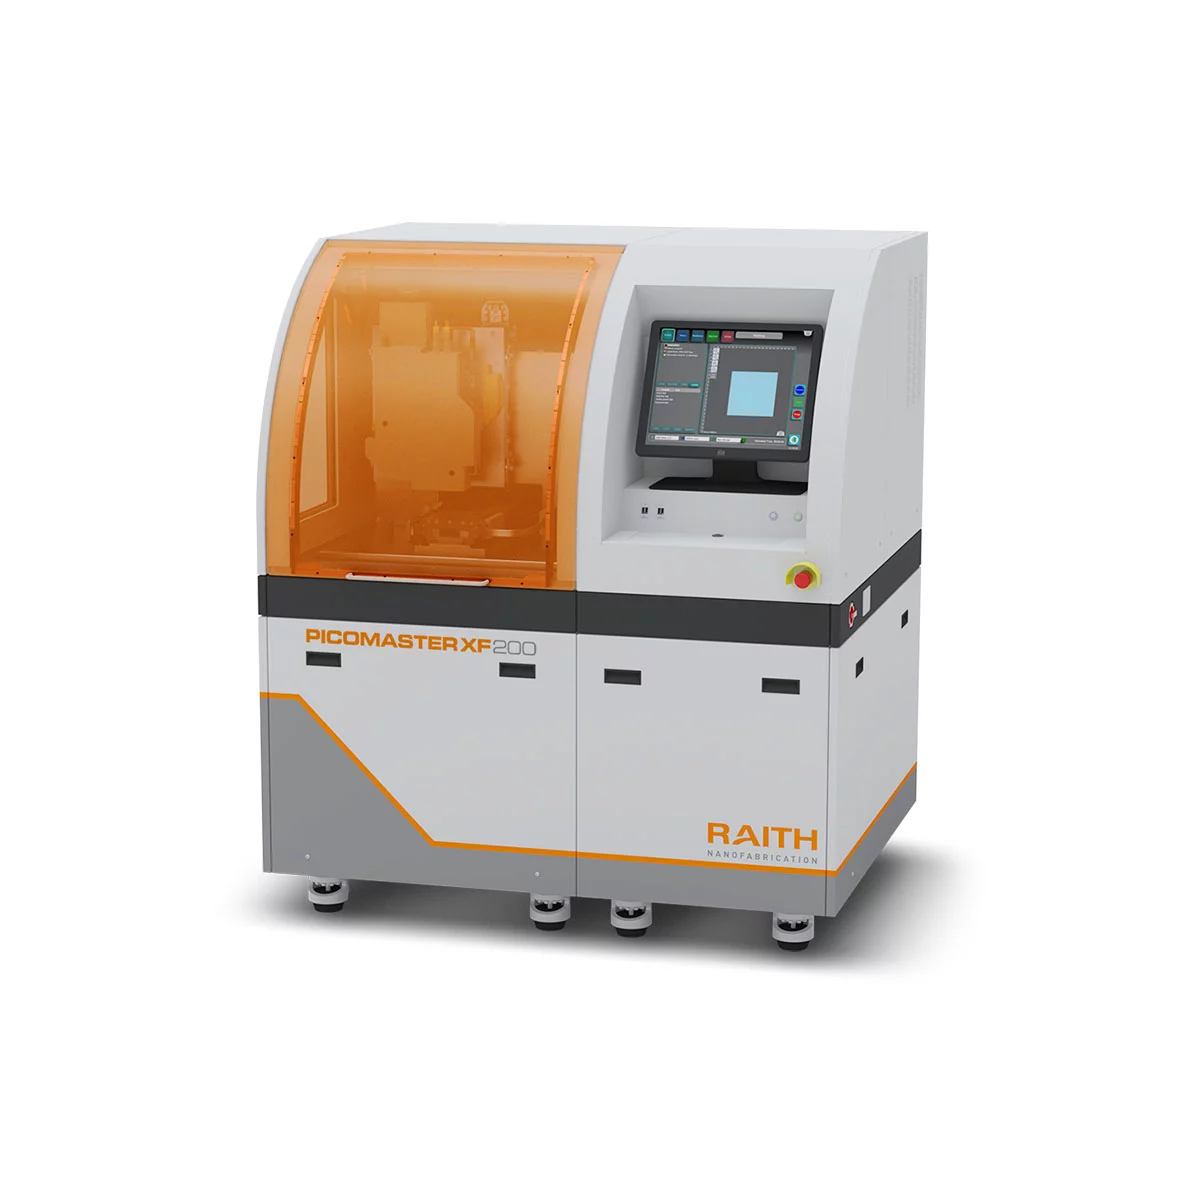 Picture of the laser lithography system PICOMASTER XF